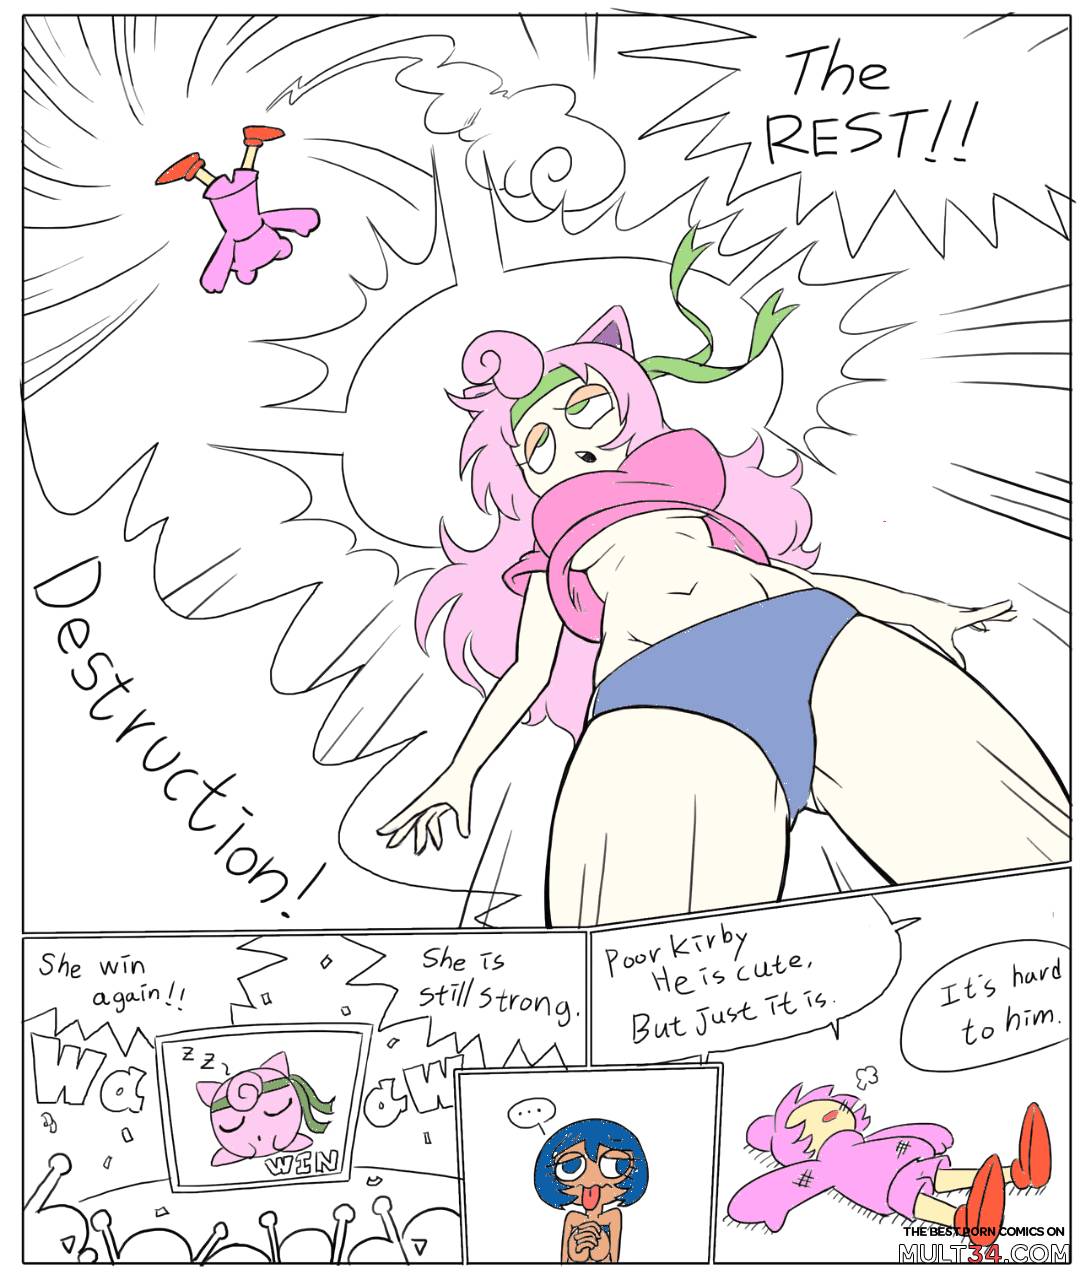 Kirby vs Jigglypuff (somewhat colorized. . .) page 3